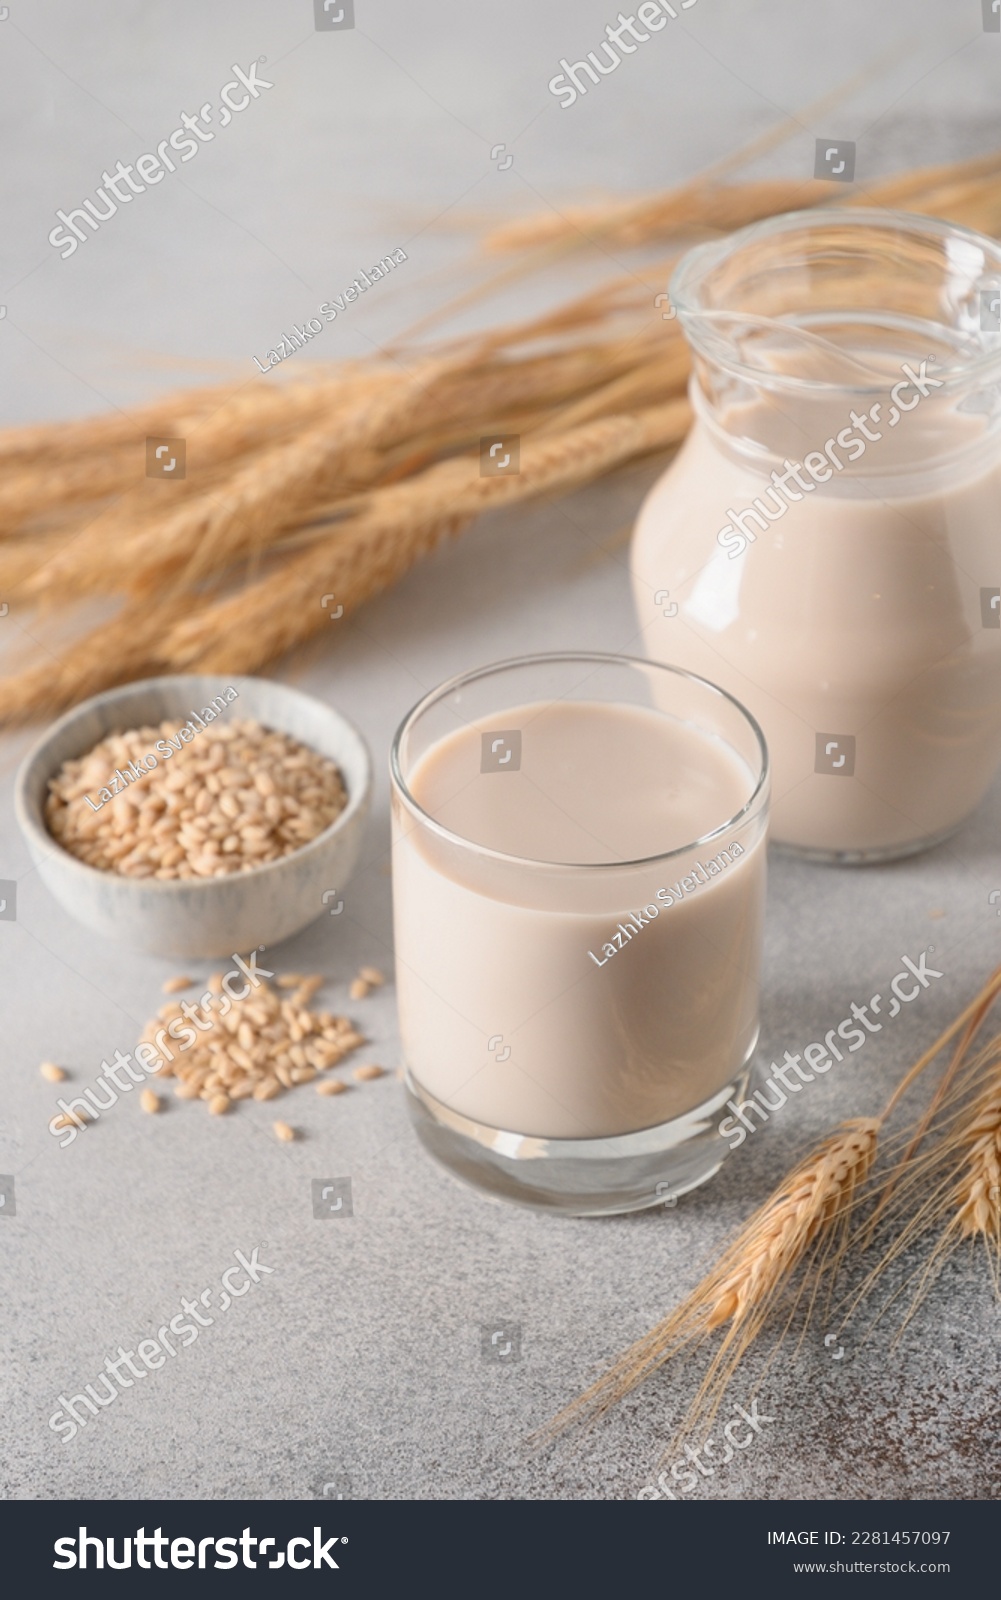 Barley milk on gray background. Alternative vegan plant based milk replacer and lactose free. Vertical format. Close up. #2281457097